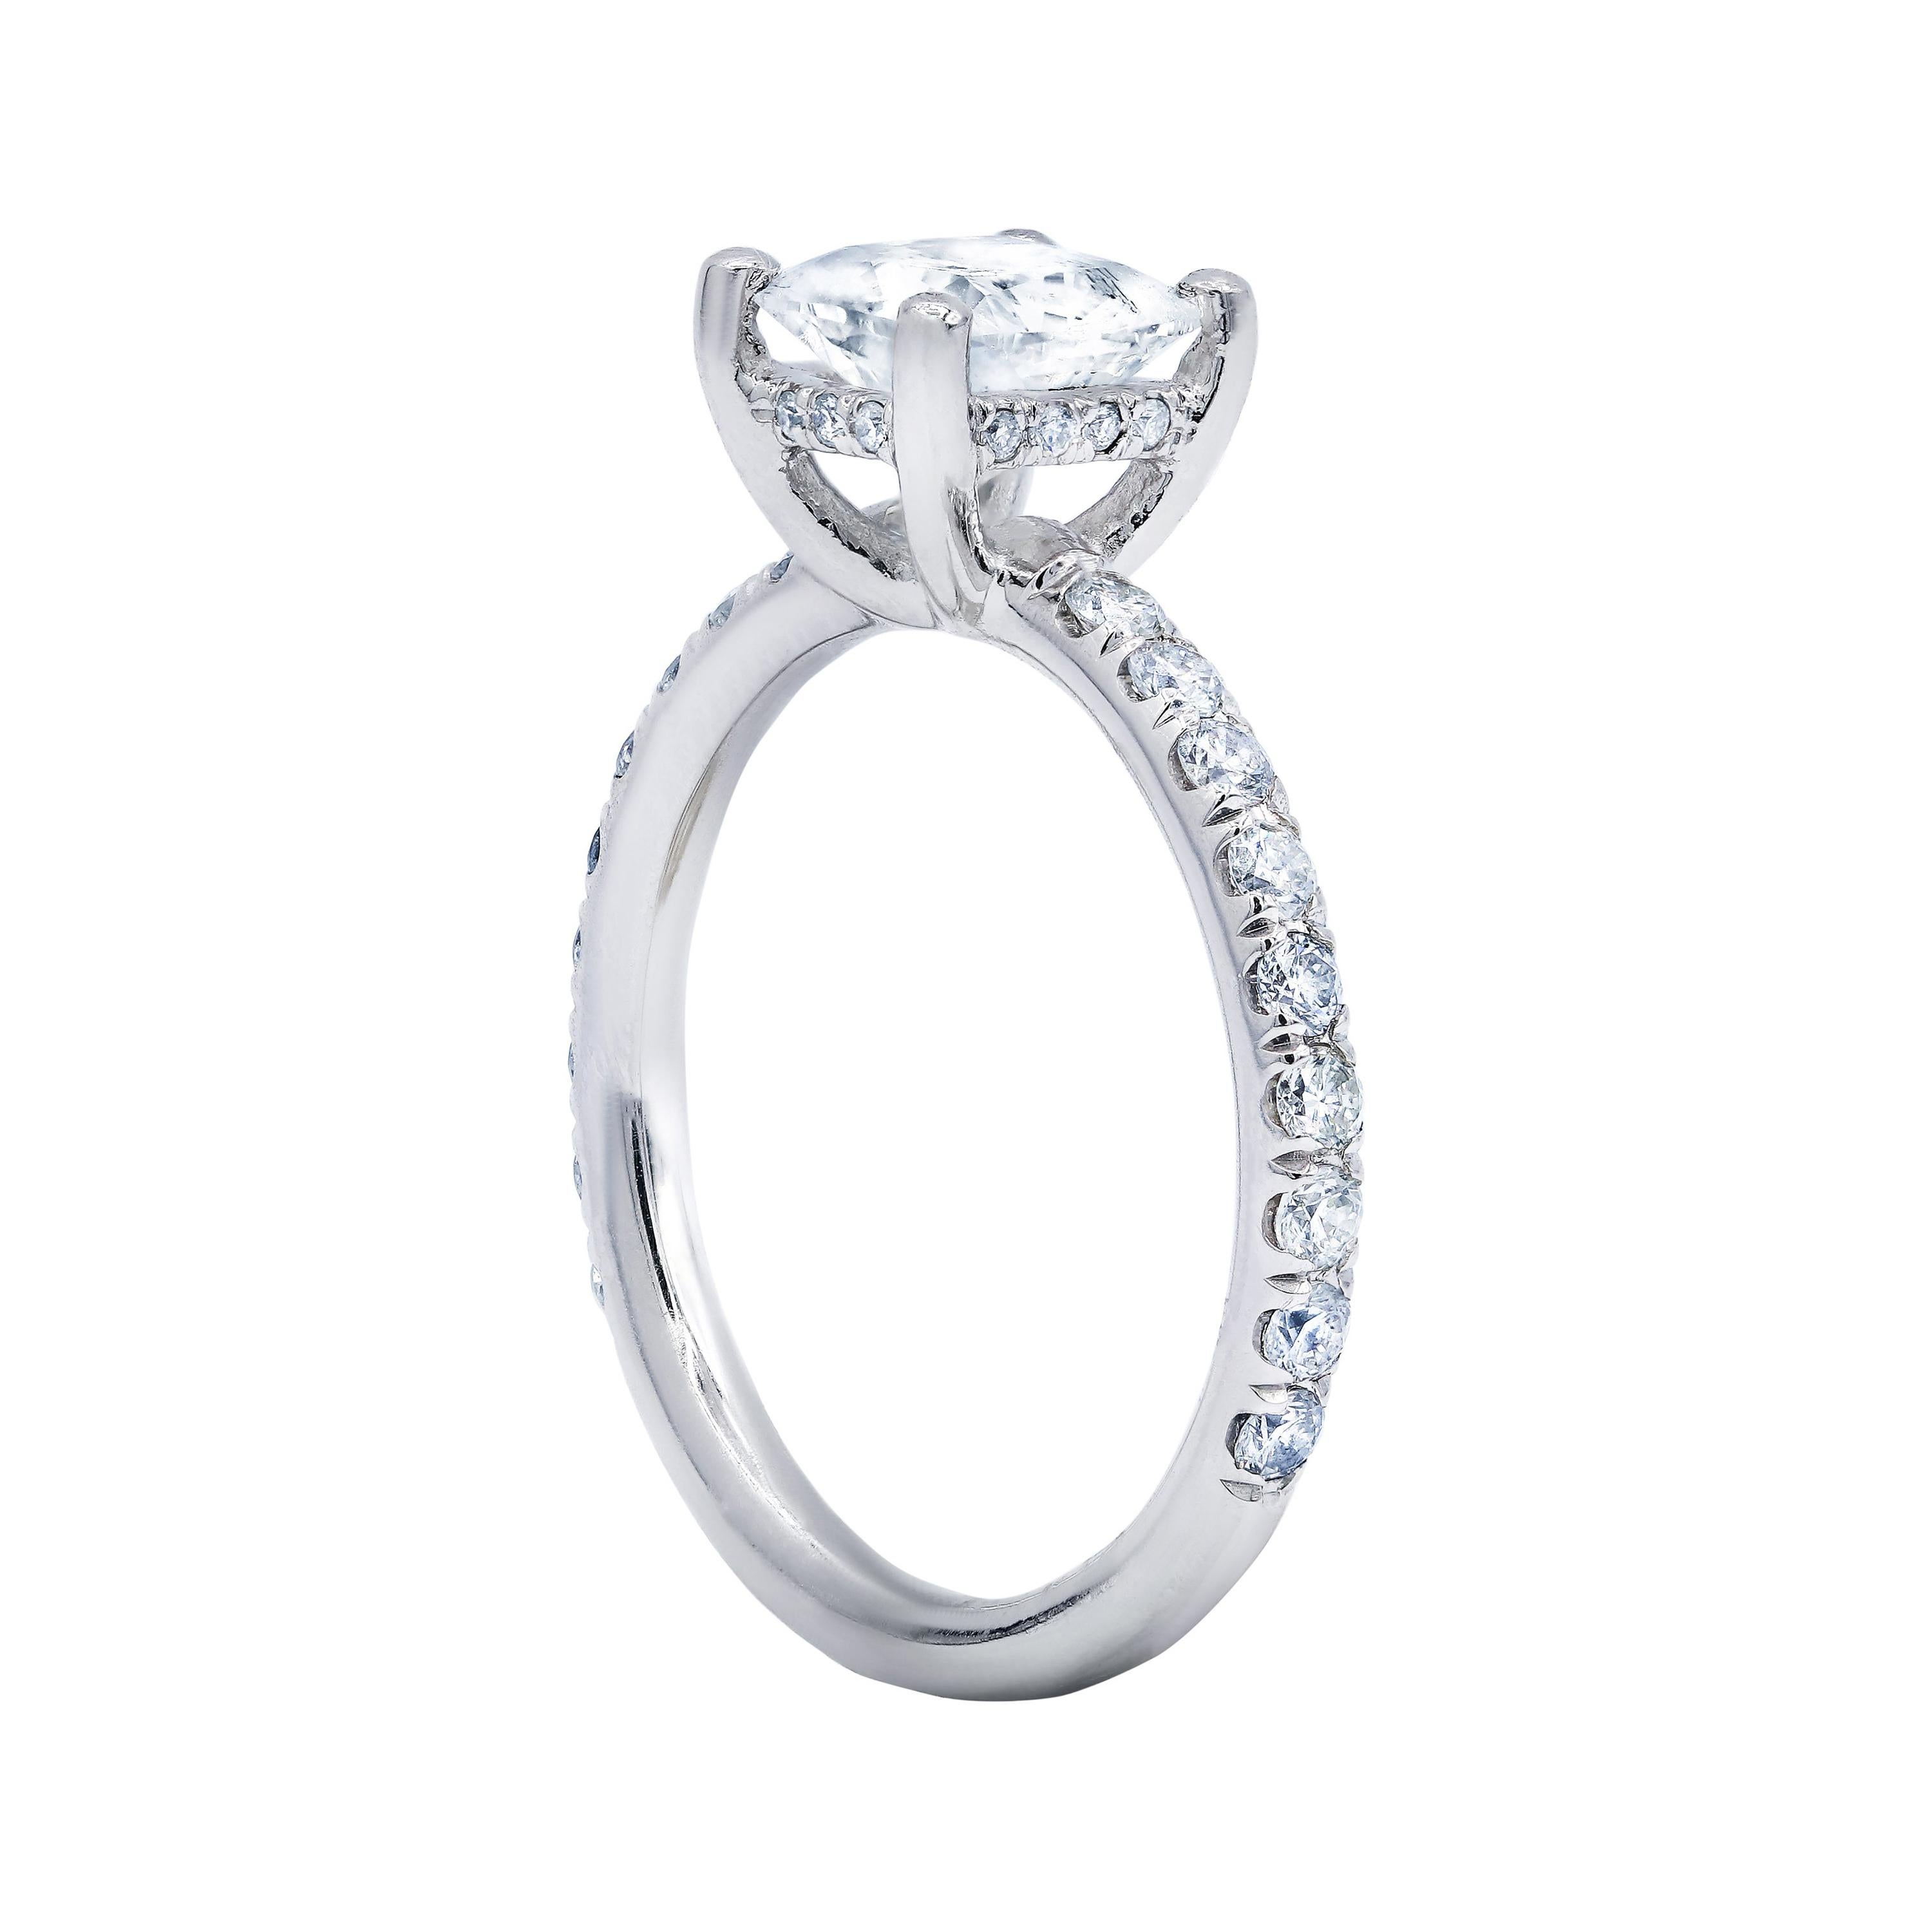 18 karat white gold classic diamond engagement ring features 1.06 carat clarity enhanced cushion cut diamond in the center and surrounded by additional 0.30 cts round diamonds on the side.
